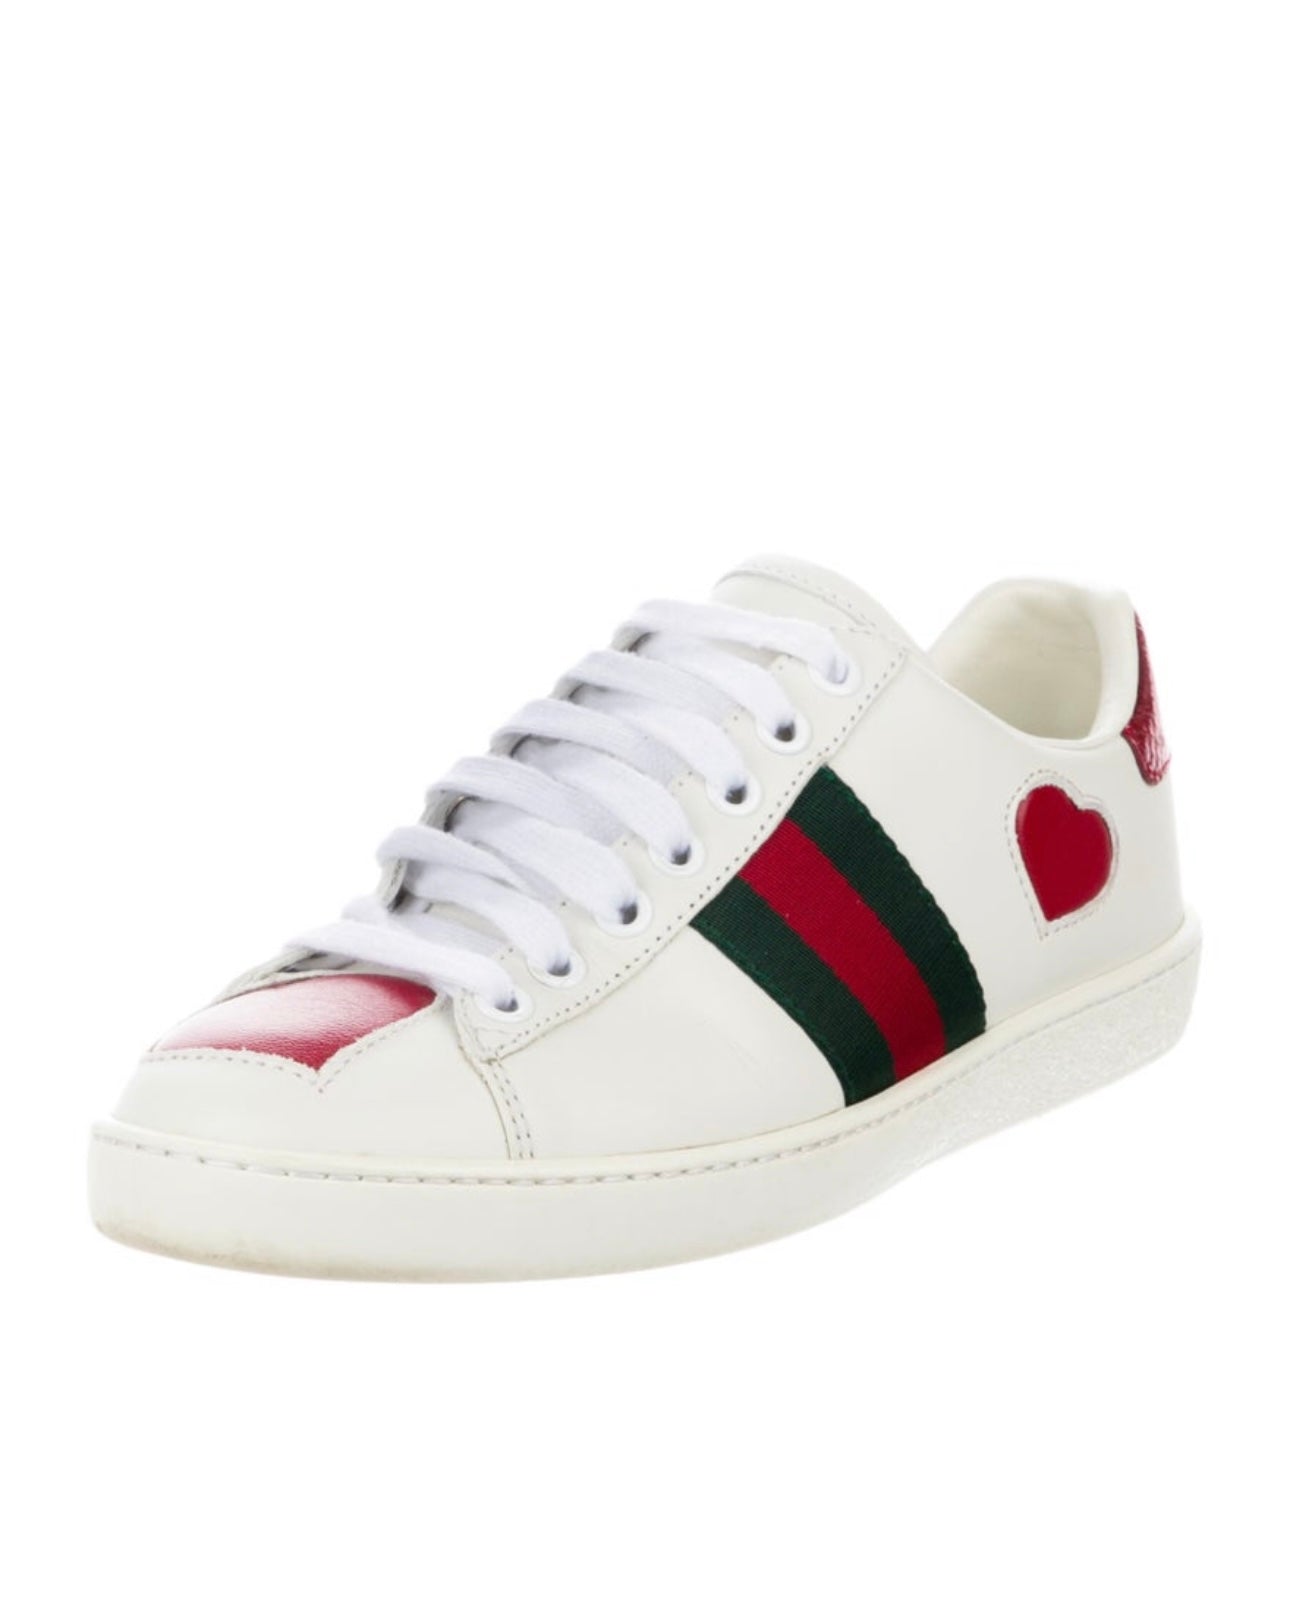 GUCCI - ACE LOW HEART SNEAKERS